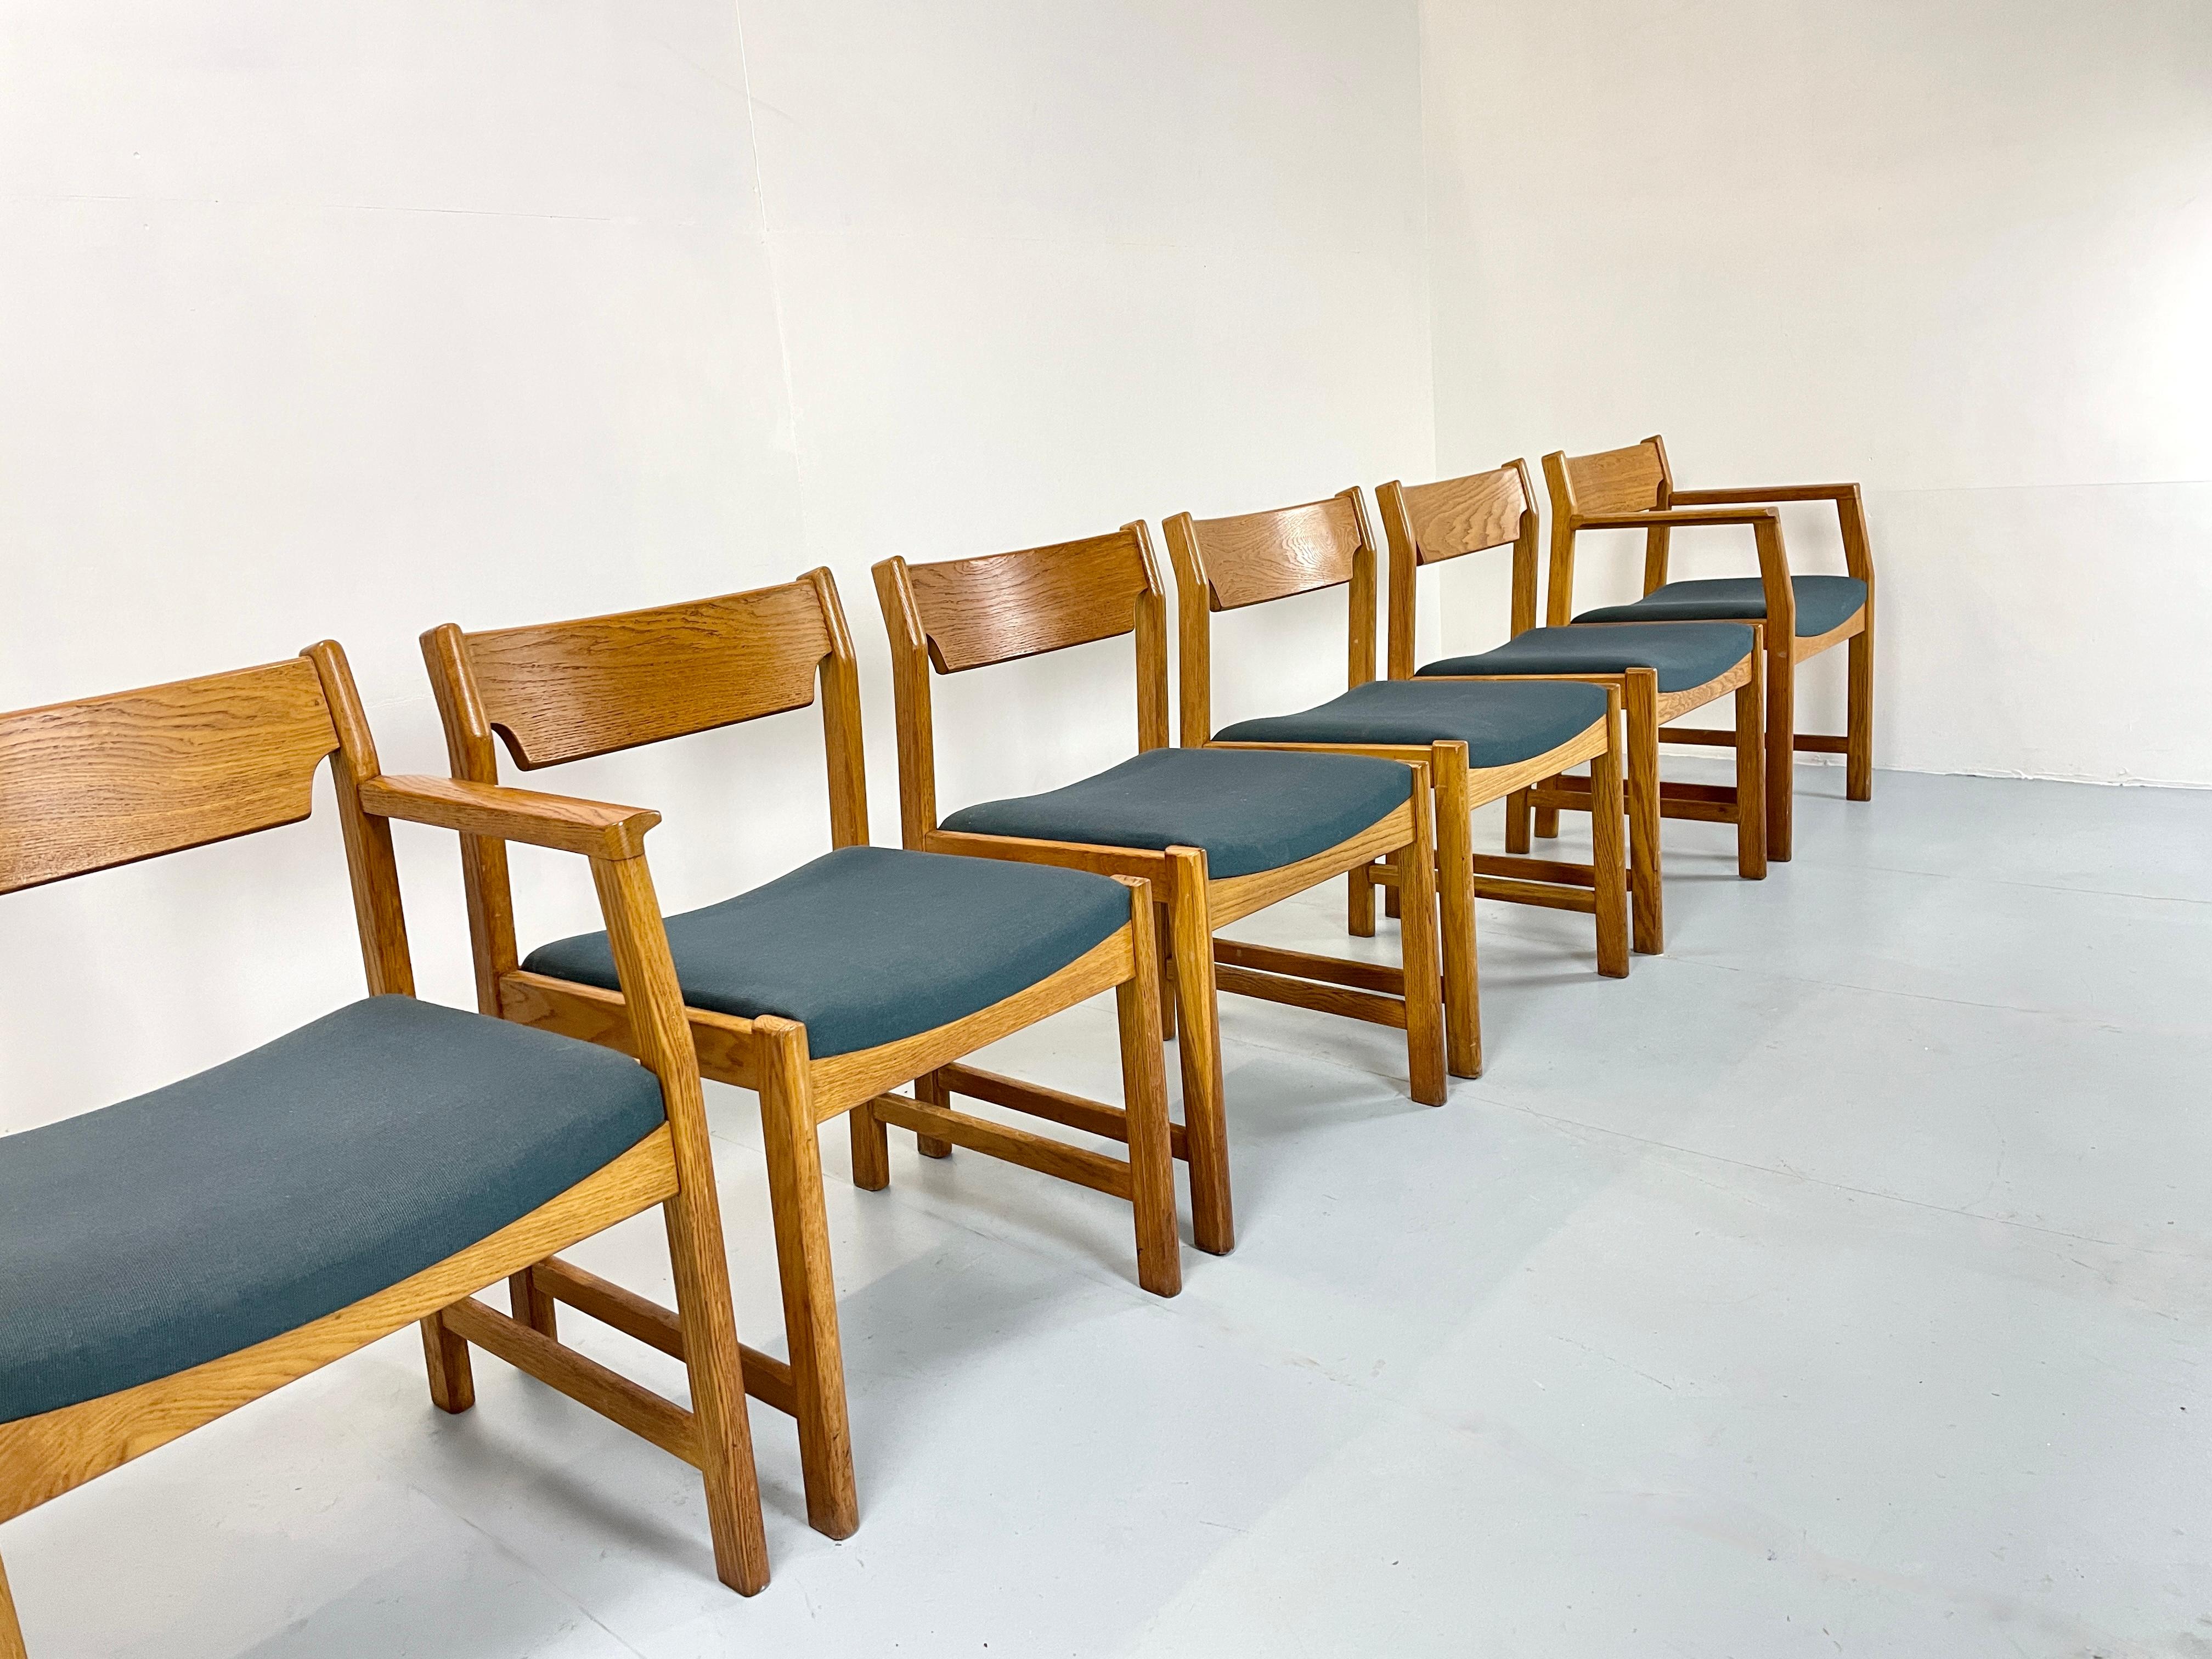 Wonderful set of six scanidavian Mid-Century Modern dinning chairs.
The frame is worked in a warm oak. 

The seat is of an anthracite cotton fabric and were cleaned by us in-house.

What is particularly great is that the individual parts are